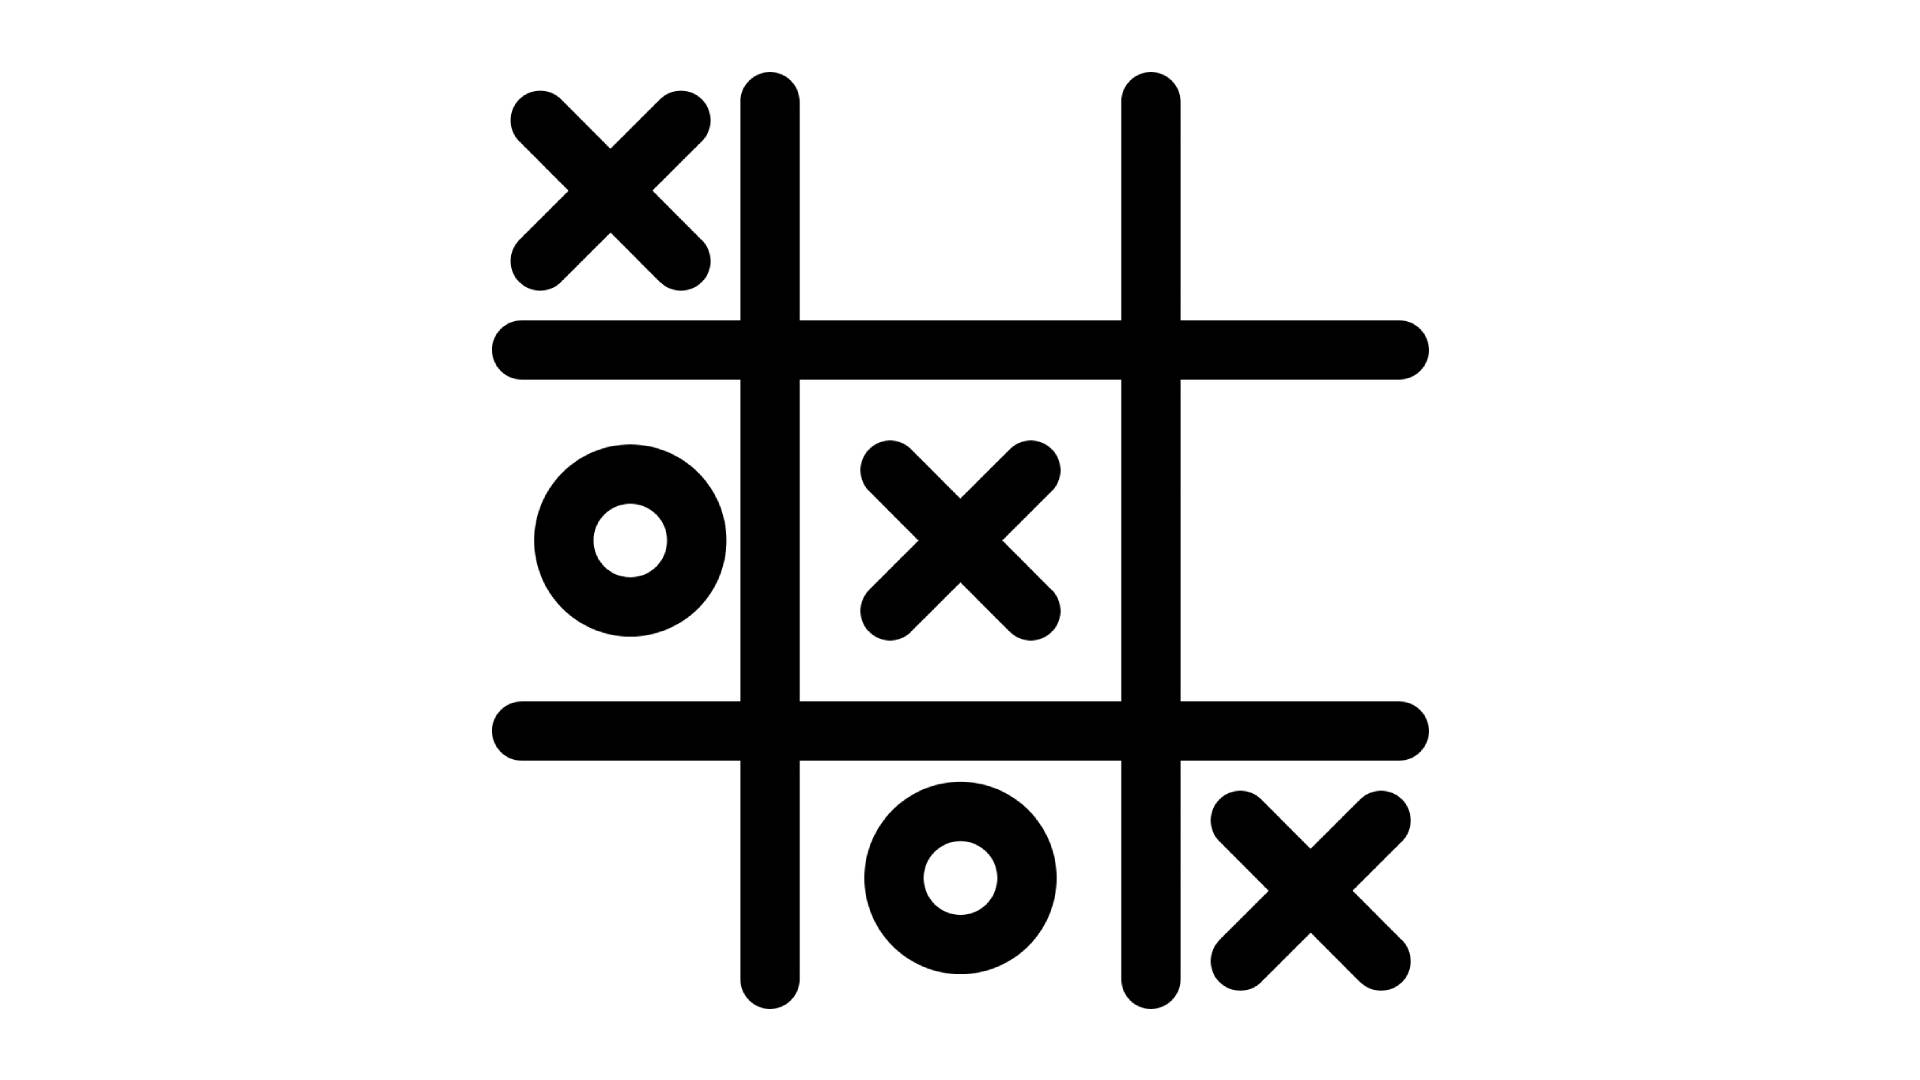 Win a game of Tic Tac Toe